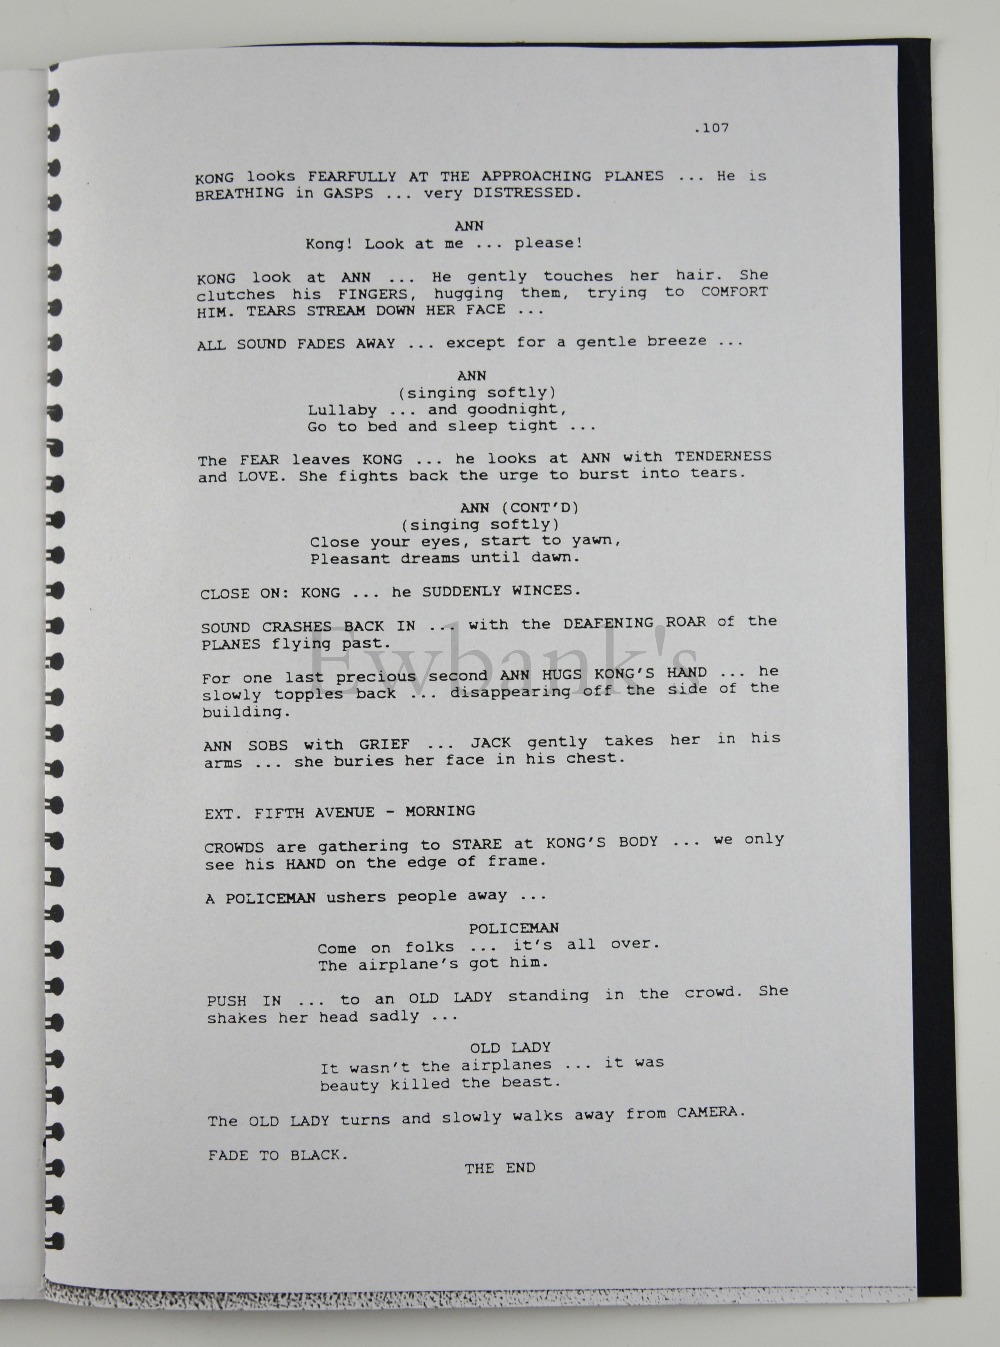 King Kong (1996) A copy of the script, first draft, by Peter Jackson and Fran Walsh, 107 pages, - Image 3 of 3